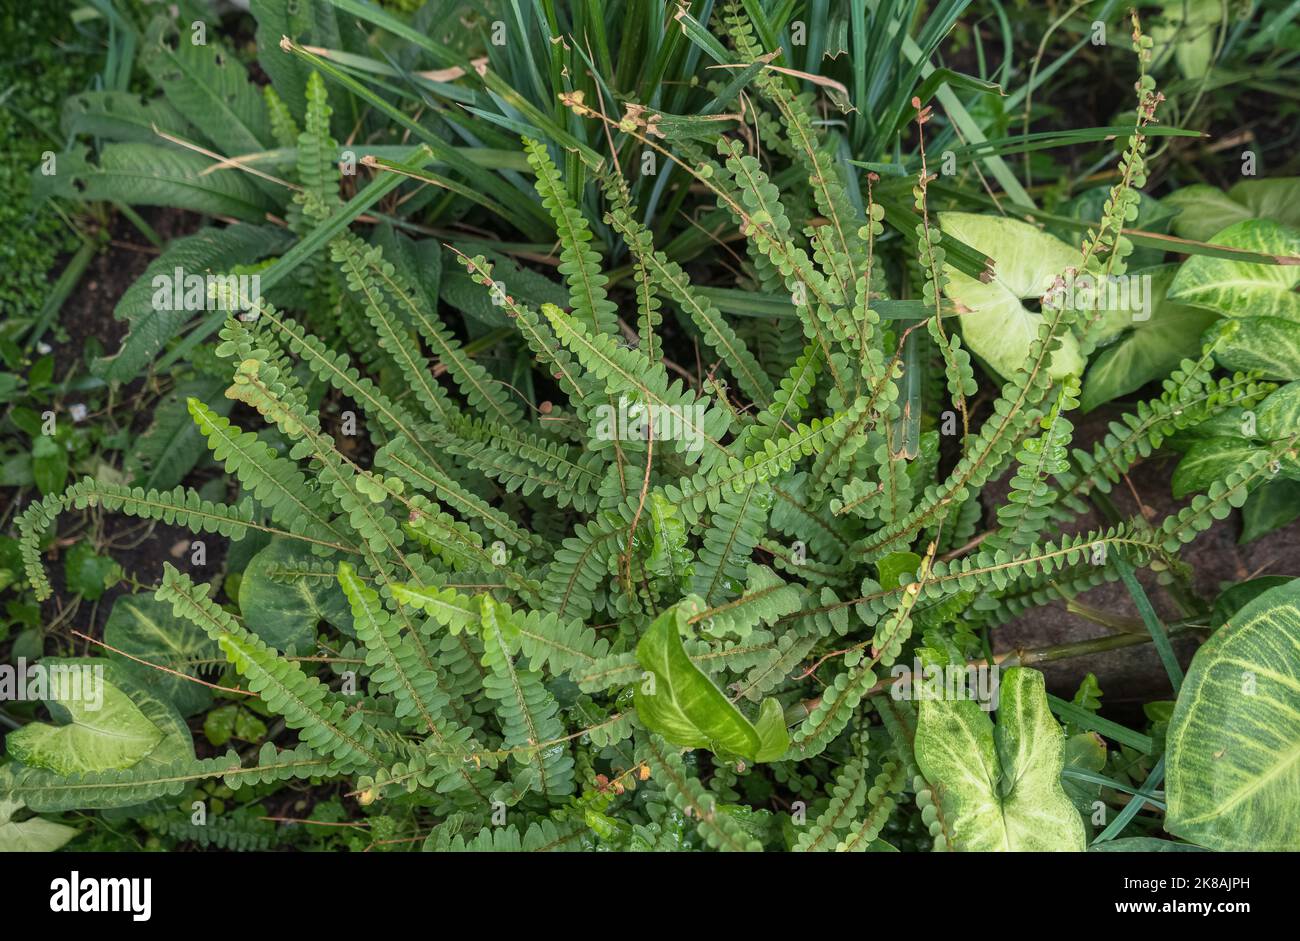 view from above on asplenium alatum leaves growing with other tropical plants Stock Photo